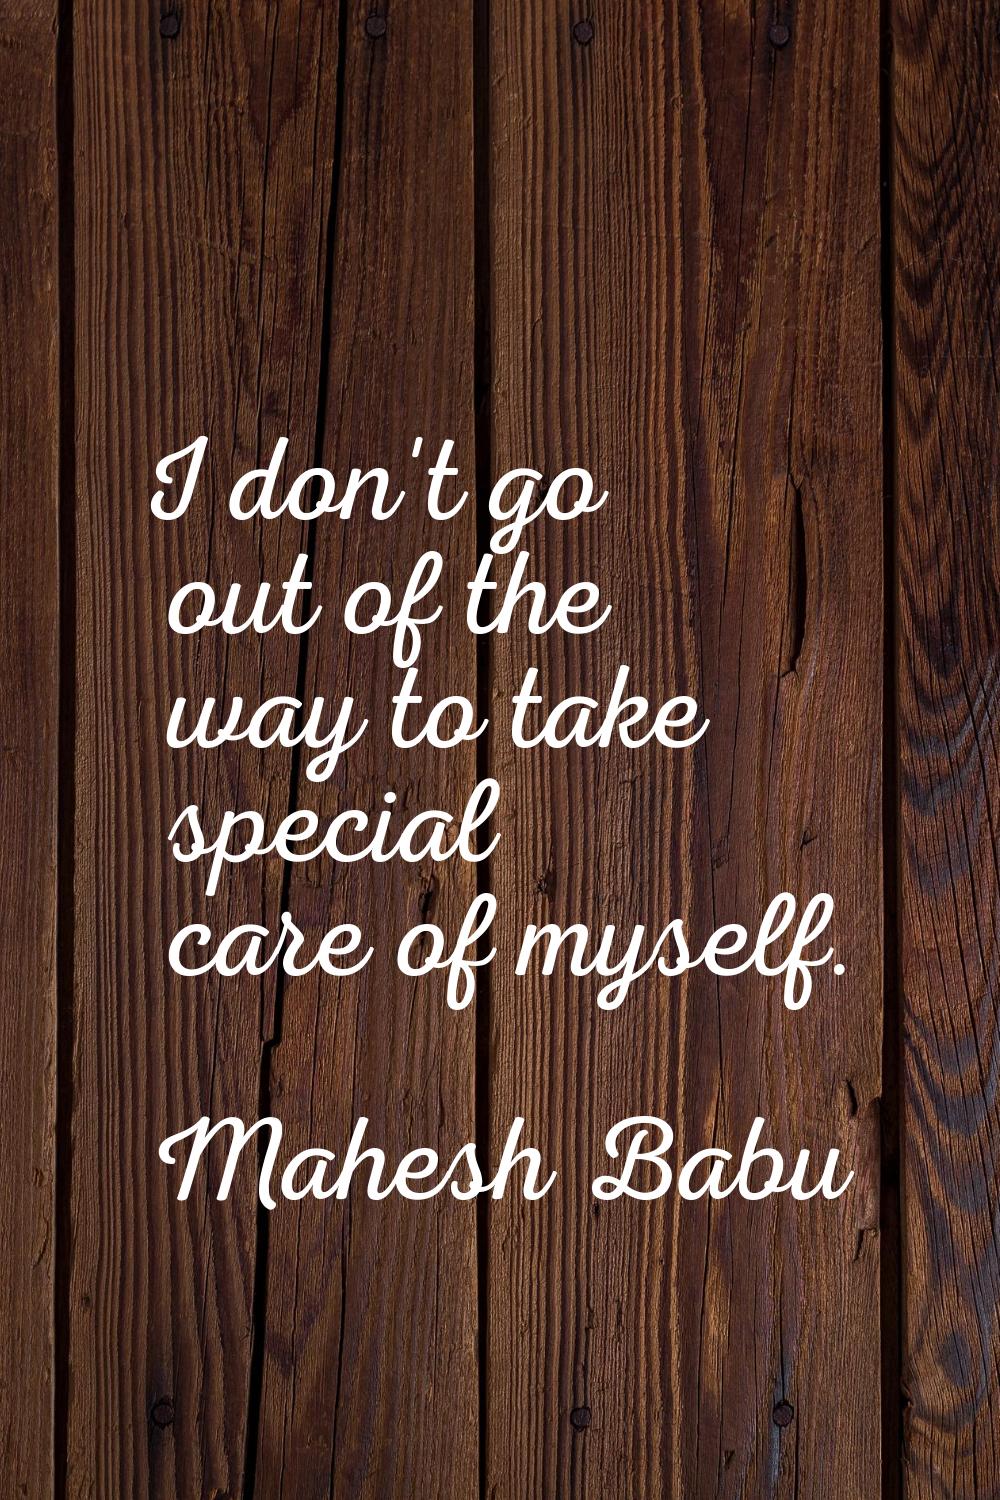 I don't go out of the way to take special care of myself.